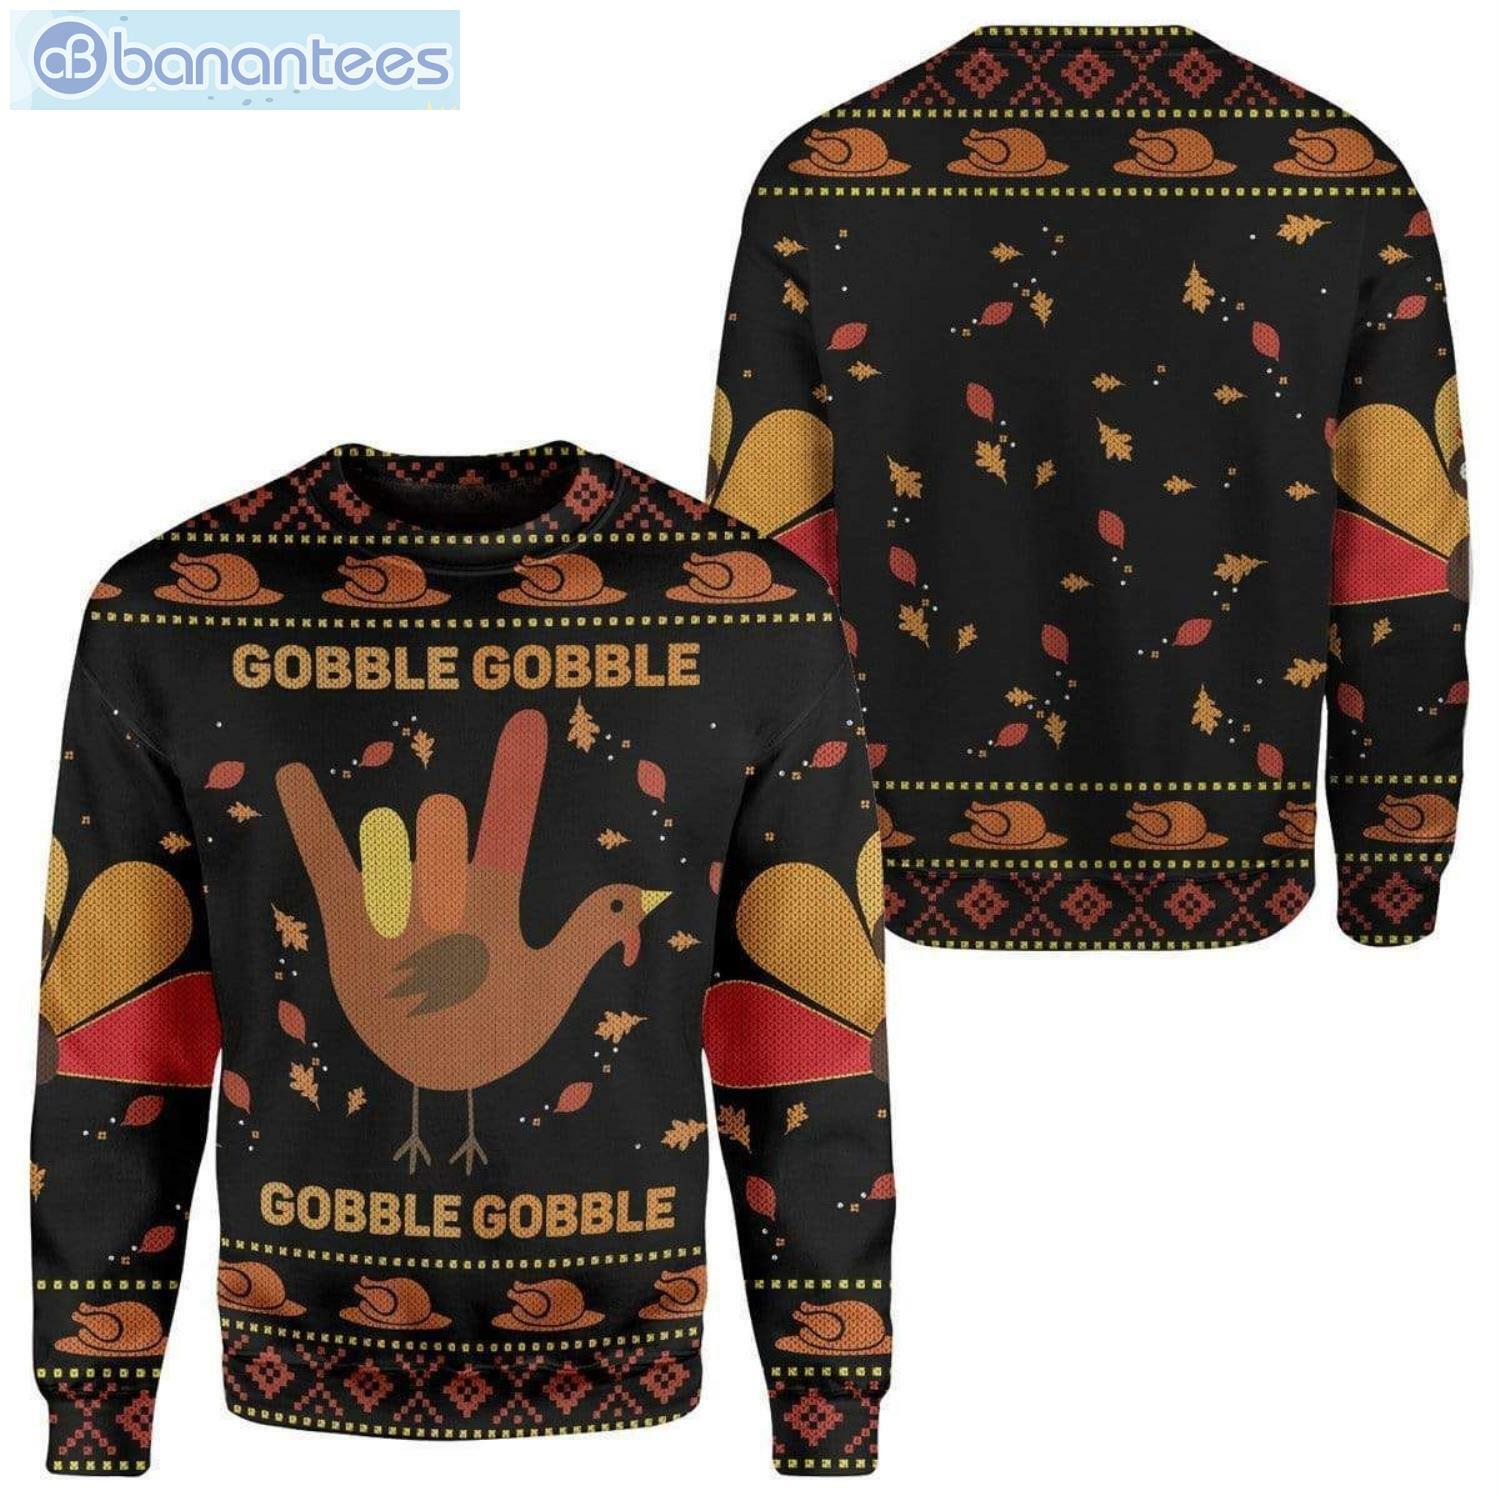 Gobble Thanks Giving Ugly Christmas Sweater Product Photo 1 Product photo 1